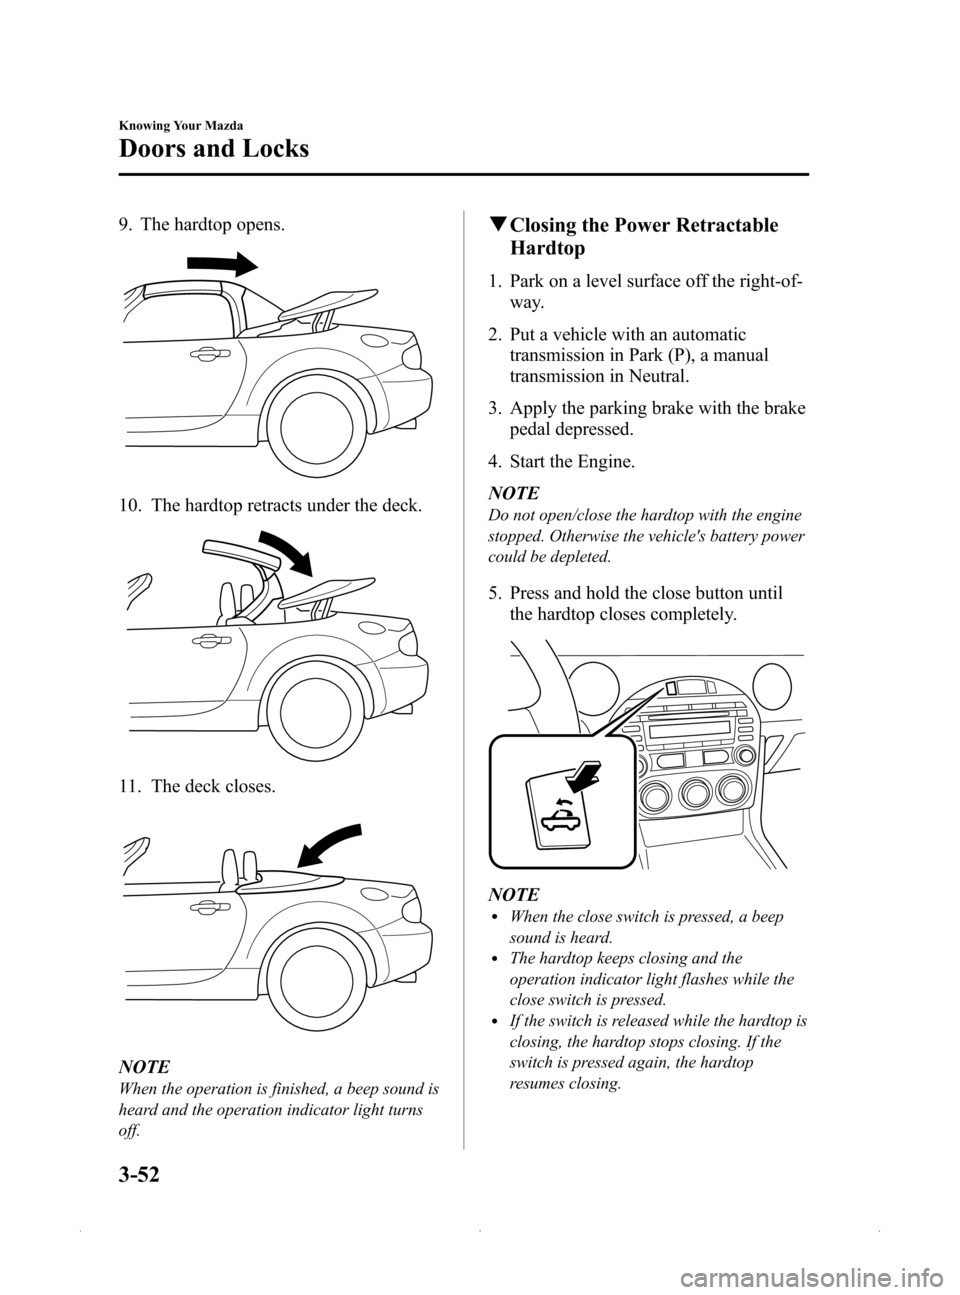 MAZDA MODEL MX-5 PRHT 2015  Owners Manual (in English) Black plate (106,1)
9. The hardtop opens.
10. The hardtop retracts under the deck.
11. The deck closes.
NOTE
When the operation is finished, a beep sound is
heard and the operation indicator light tur